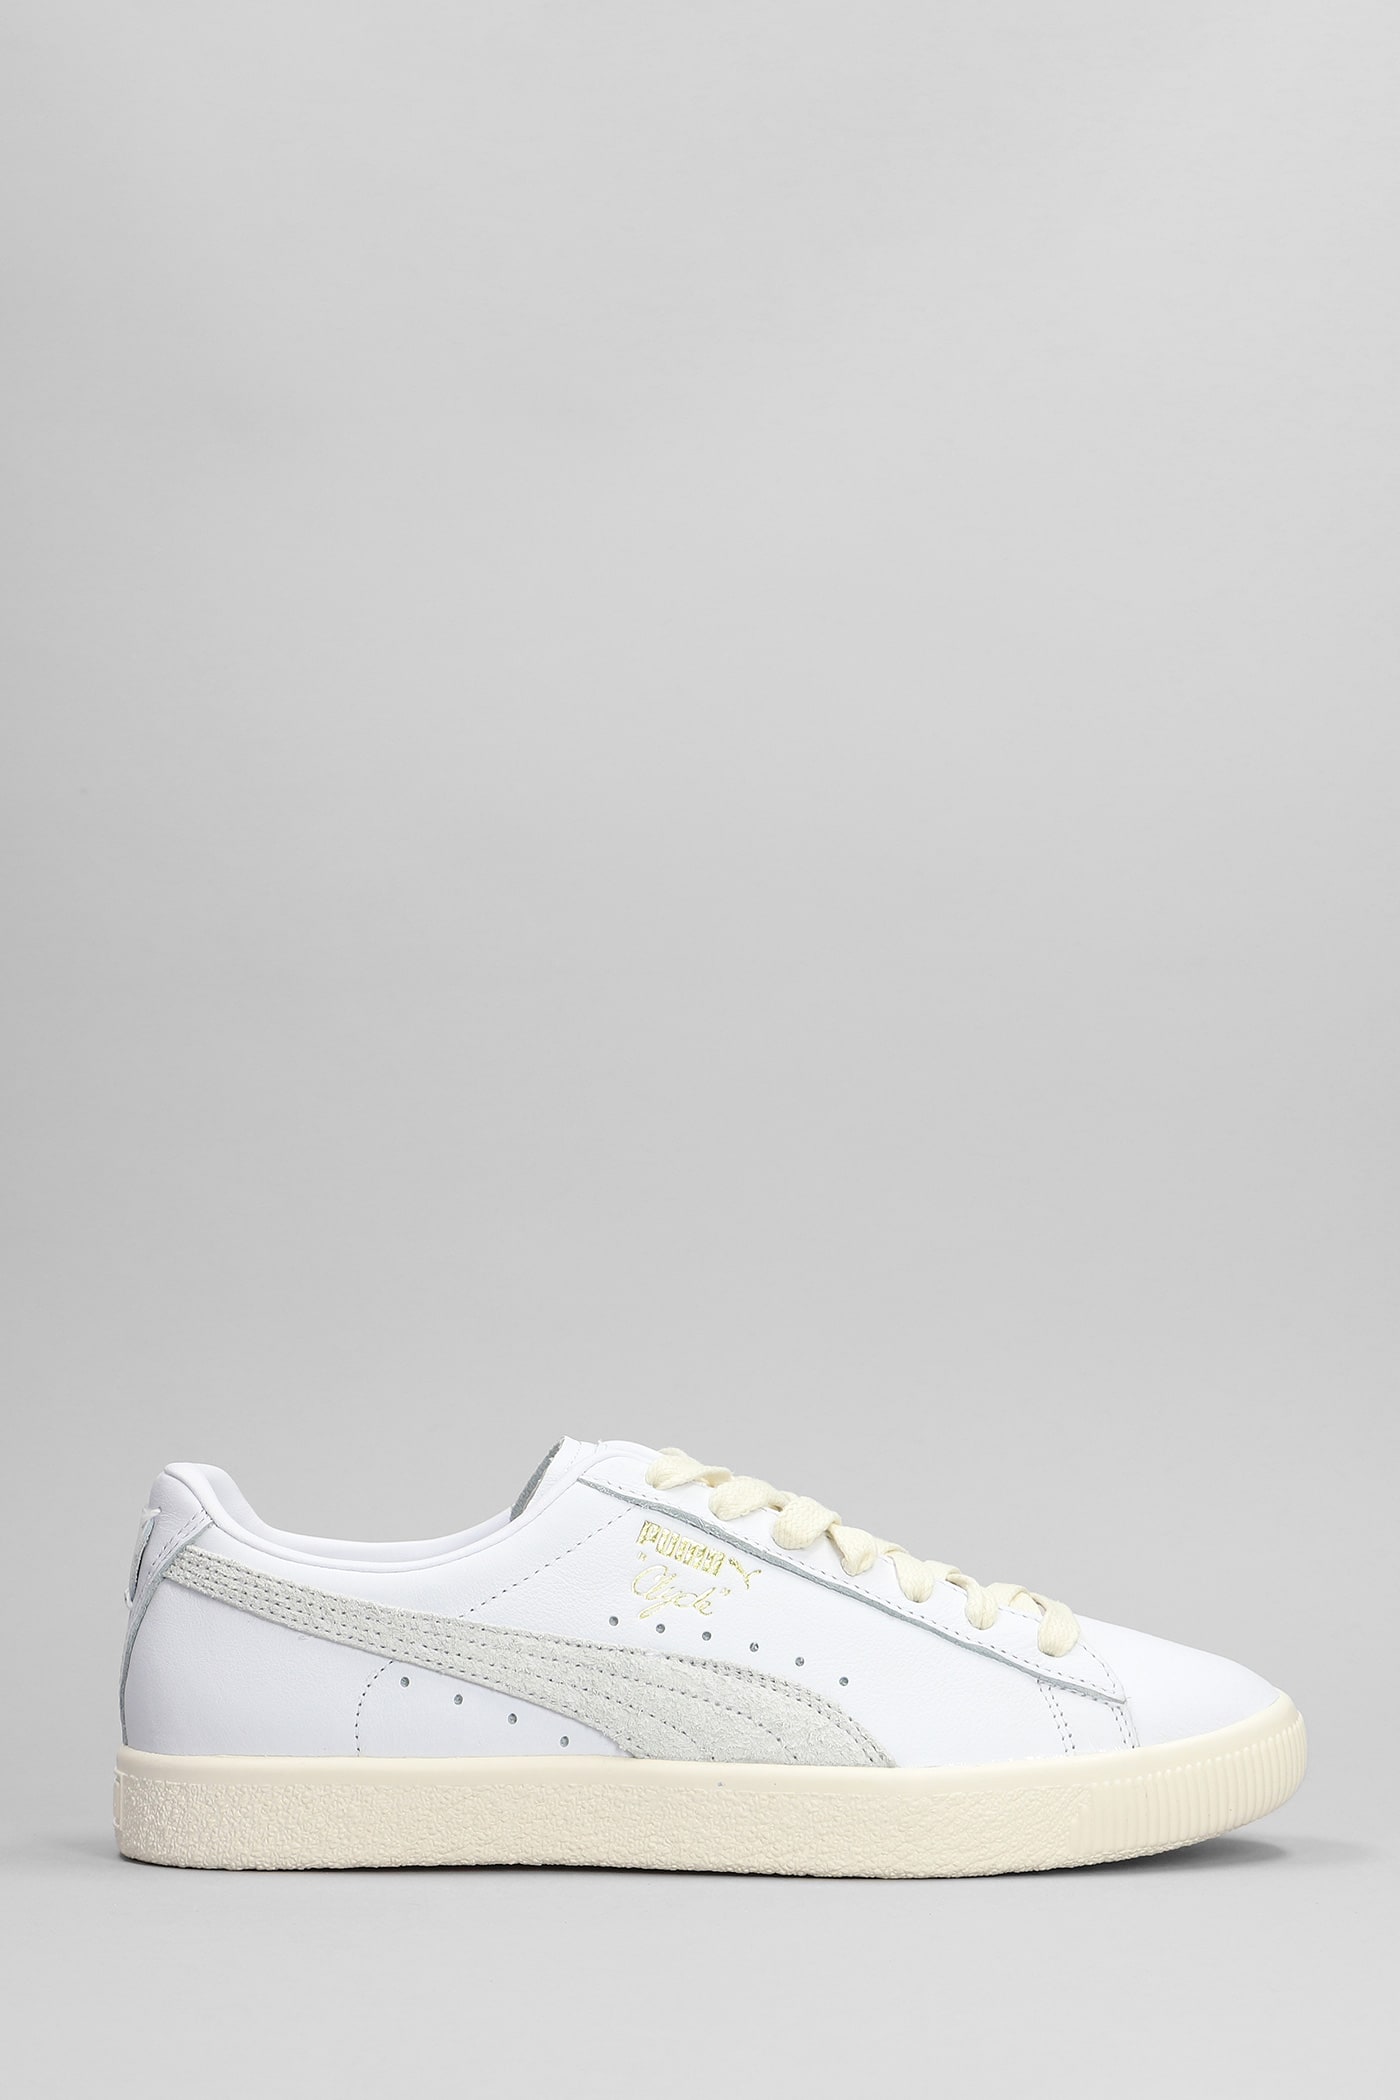 PUMA CLYDE BASE SNEAKERS IN WHITE LEATHER